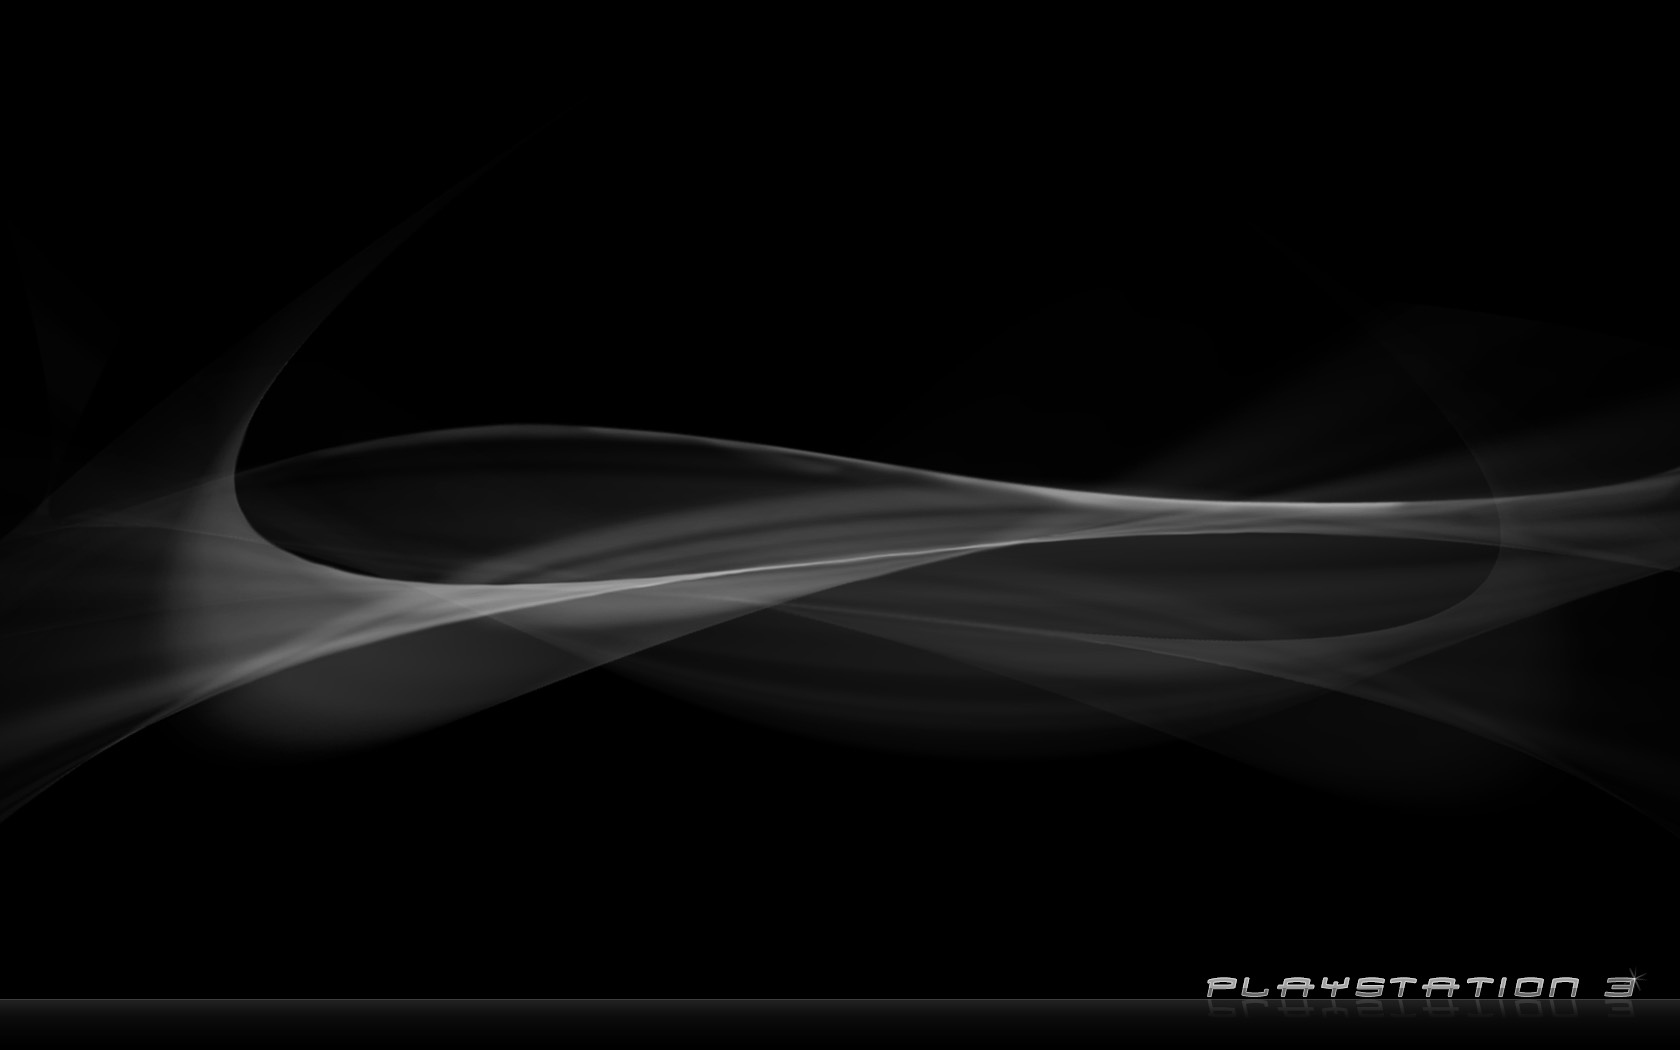 Playstation 3 Wallpaper by Helix FX on